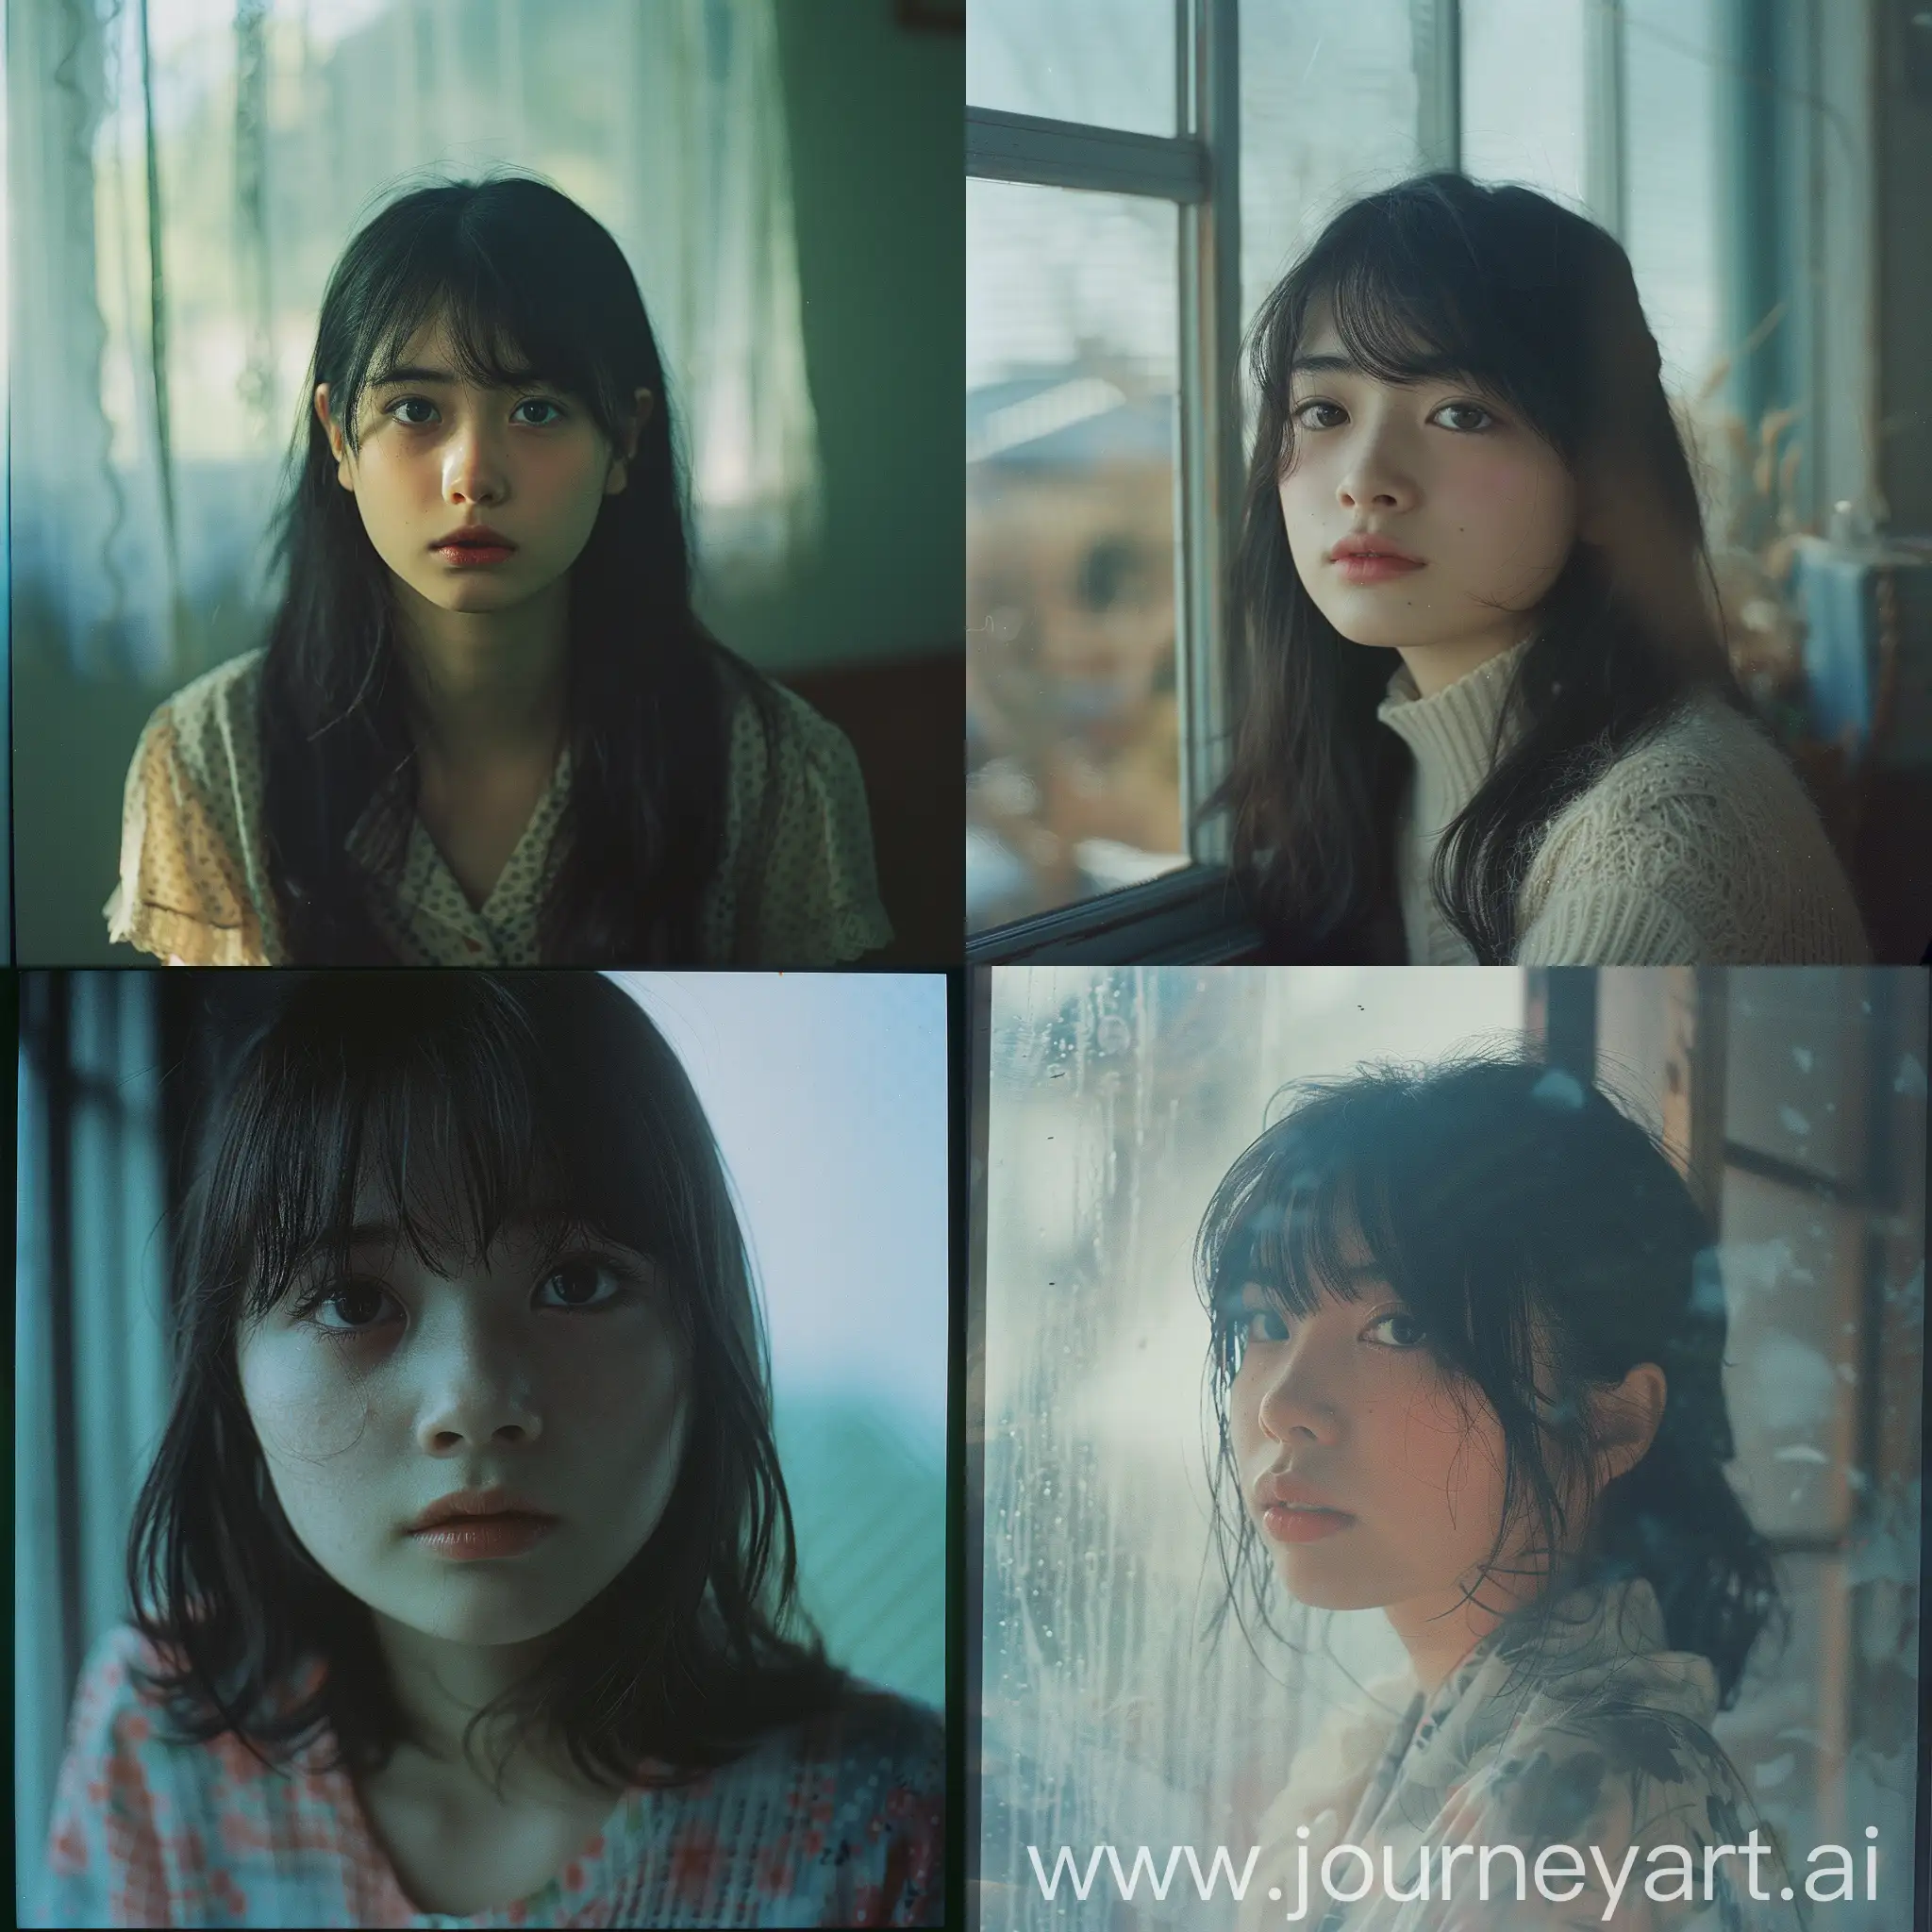 realistic, movie stills, full body, full shot, wide shot, A cute Japanese girl, bringing back memories of first love and being shy and blushing, looking cute, movie stills, realism, clear light and shadow, movie texture, film photos, expired film, creating a melancholy atmosphere, an amazing fantasy movie scene, strong dramatic tension, rich details, clear light and shadow, a strong sense of cinema